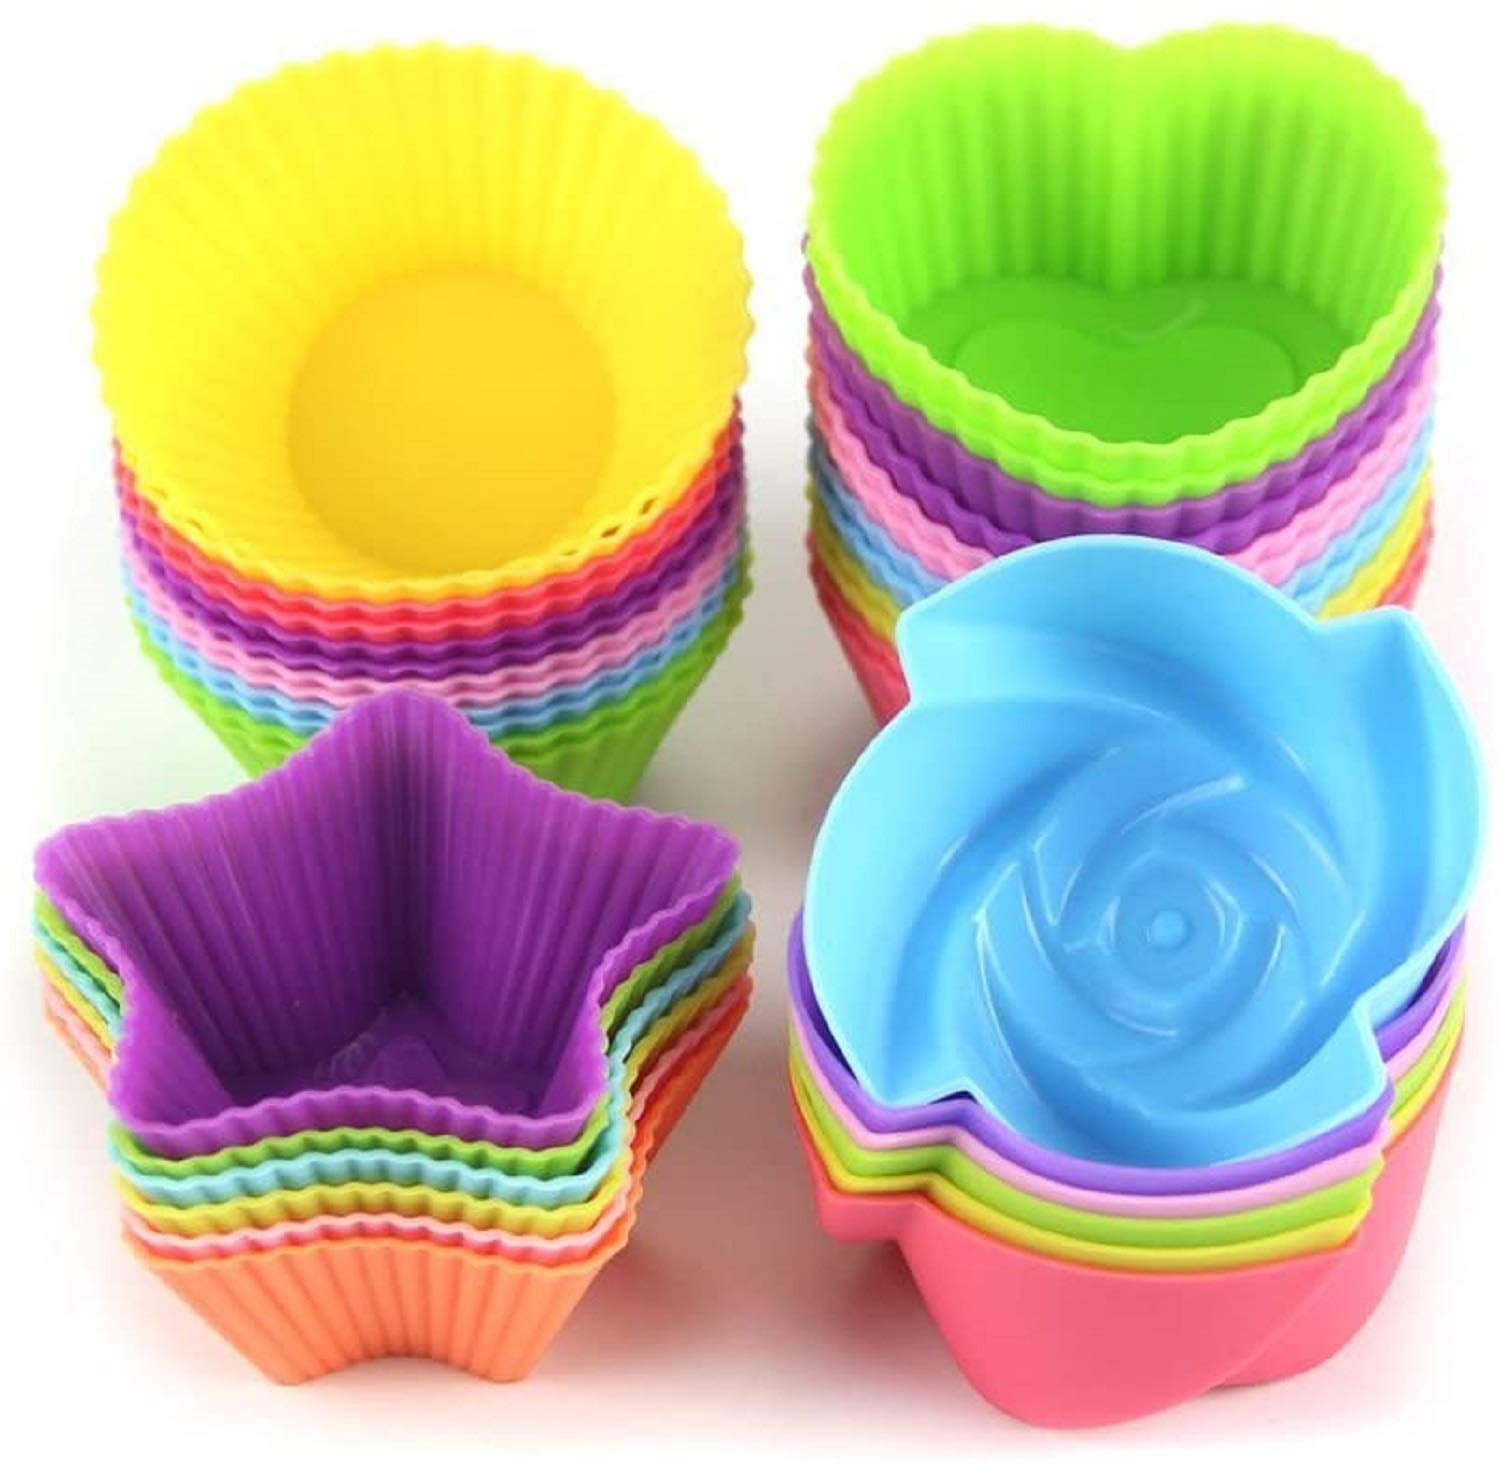 Pack of 12 Non-Stick Baking Cups Liners Details about   AmazonBasics Reusable Silicone 